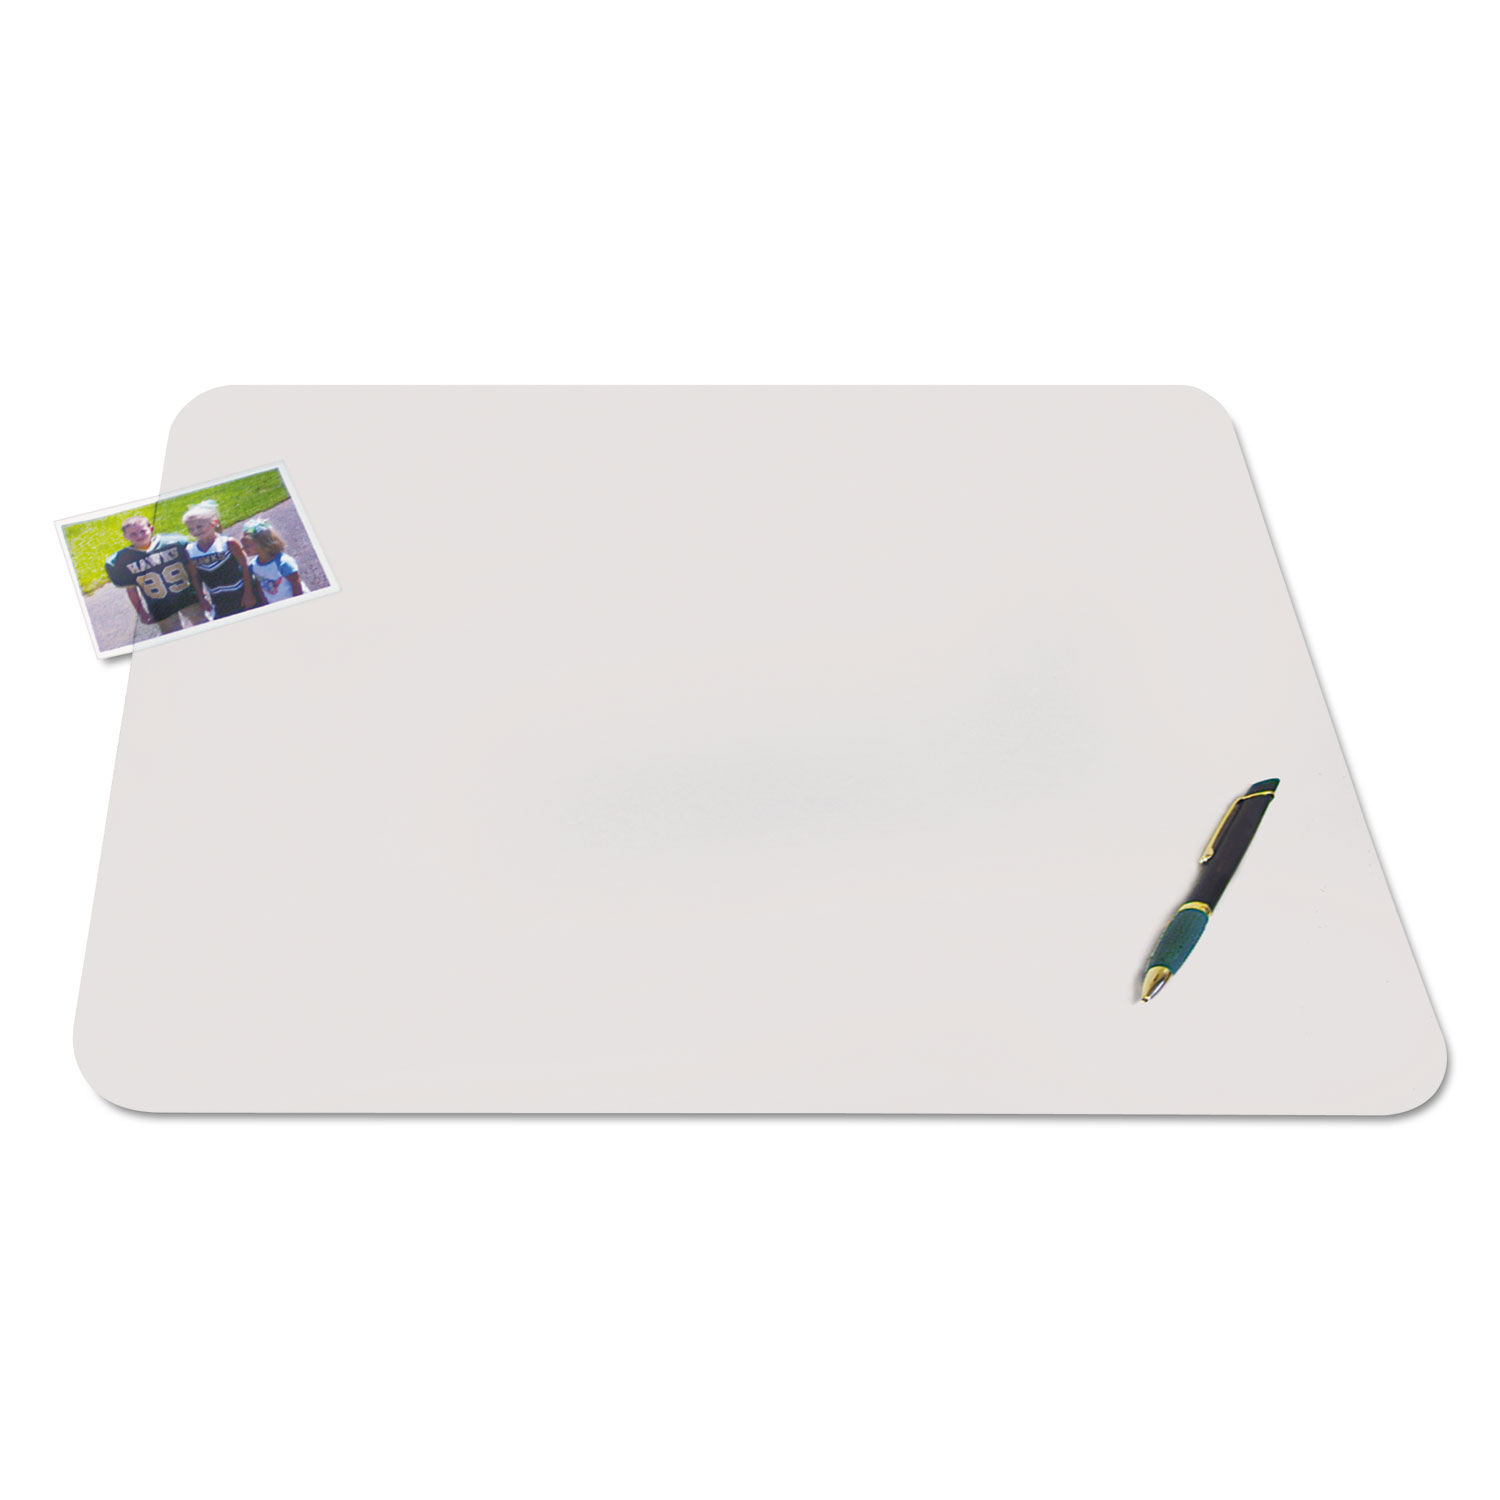 KrystalView Desk Pad with Microban, Matte Finish, 36 x 20, Clear